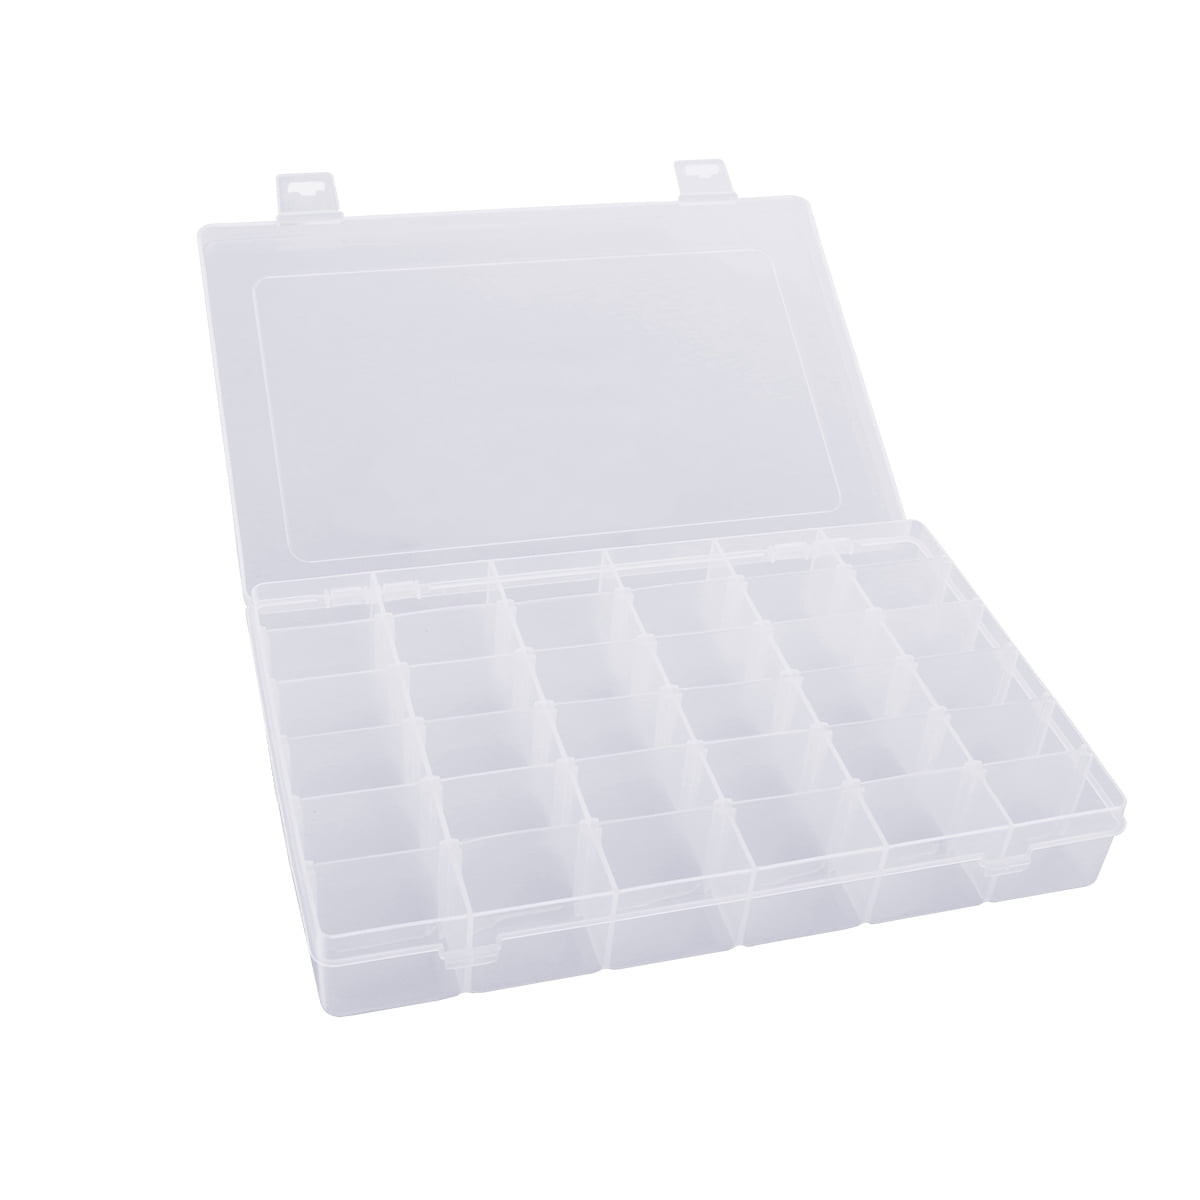 Aketek Hard Plastic Clear 36 Compartment Jewelry Storage Box Organizer with Removable Dividers 